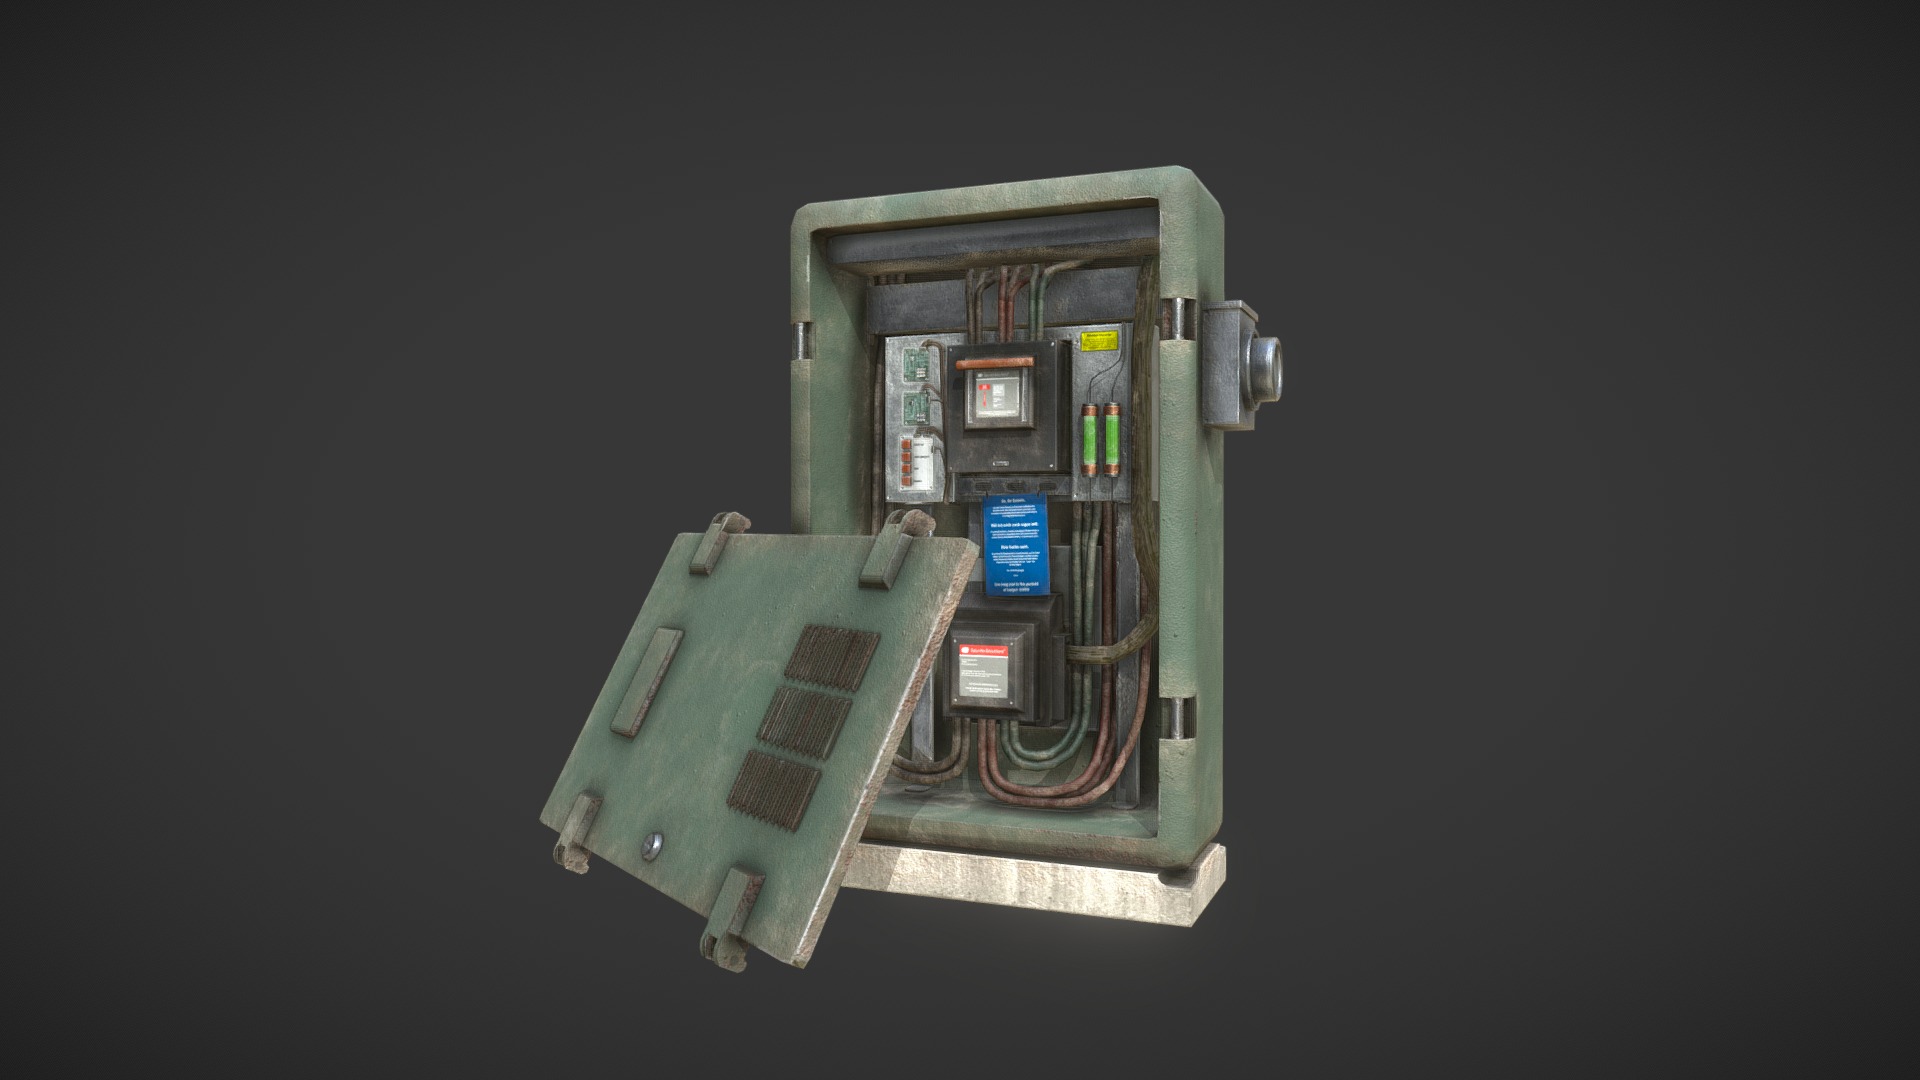 Game asset made in Maya and Substance Painter. Part of a bigger environment, as usual.

Related Artstation post: https://www.artstation.com/artwork/0XoV95 - Transformator Box - Download Free 3D model by lpfeffer 3d model